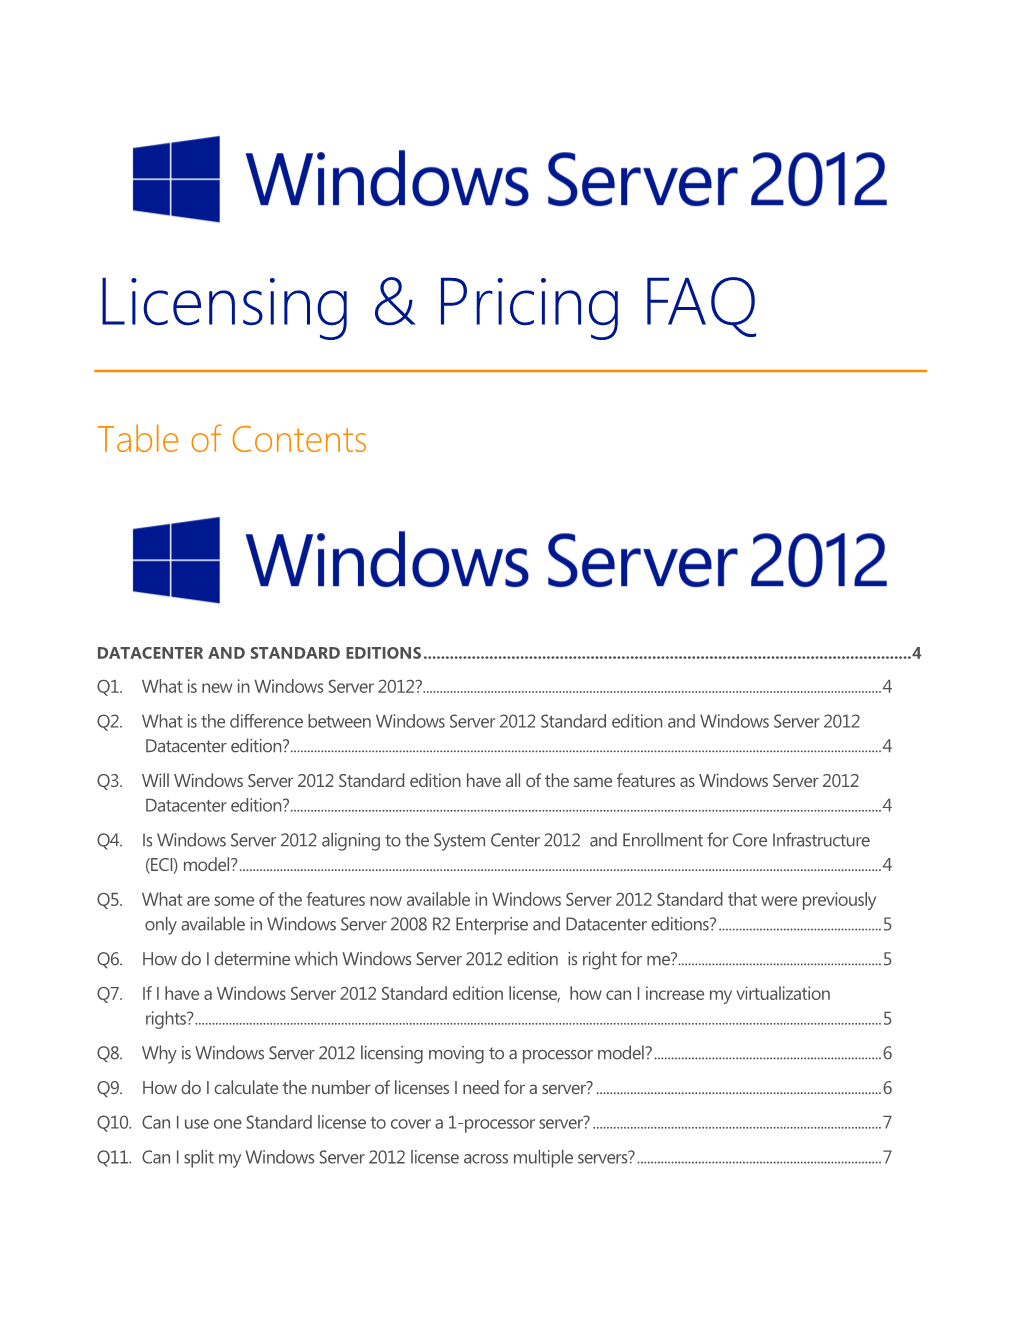 Windows Server 2012 Licensing and Pricing